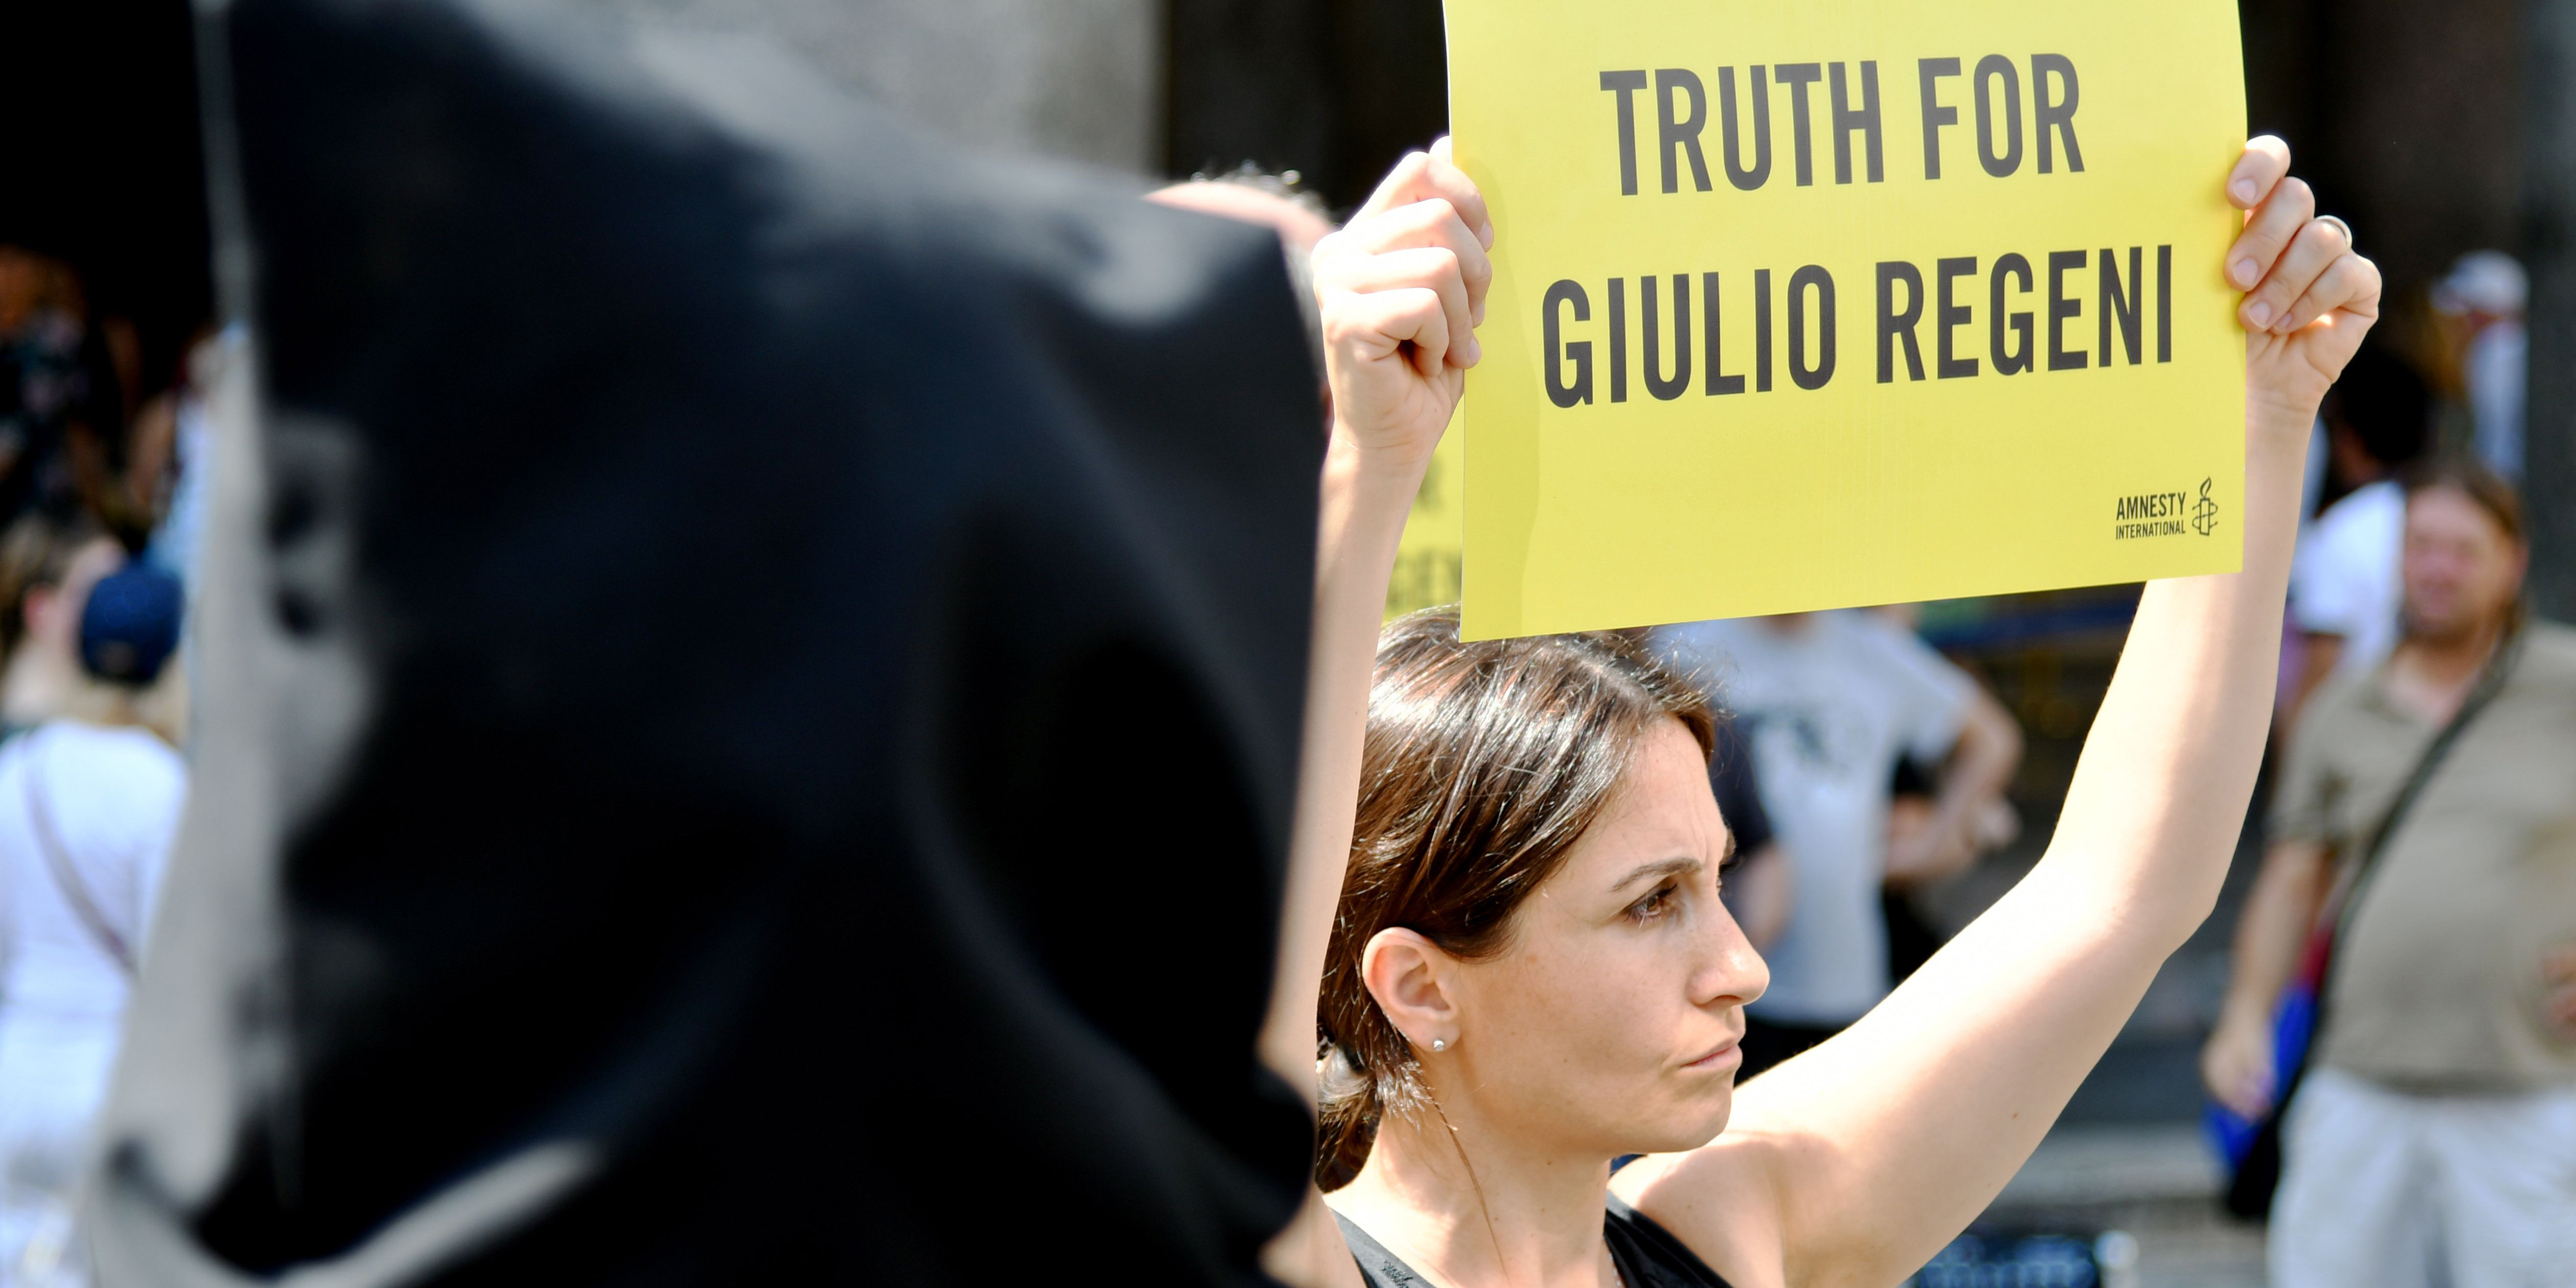 Amnesty International activists perform a flash mob on July 13, 2016, in Rome's Pantheon square to remember late Italian student Giulio Regeni and other victims following their last report.
The badly mutilated body of Regeni, a 28-year-old Cambridge University PhD student, was found out on February 4, 2016 in Cairo. Italian media and diplomats say he was killed by the security services but Egypt denies the claims.  / AFP / VINCENZO PINTO        (Photo credit should read VINCENZO PINTO/AFP/Getty Images)